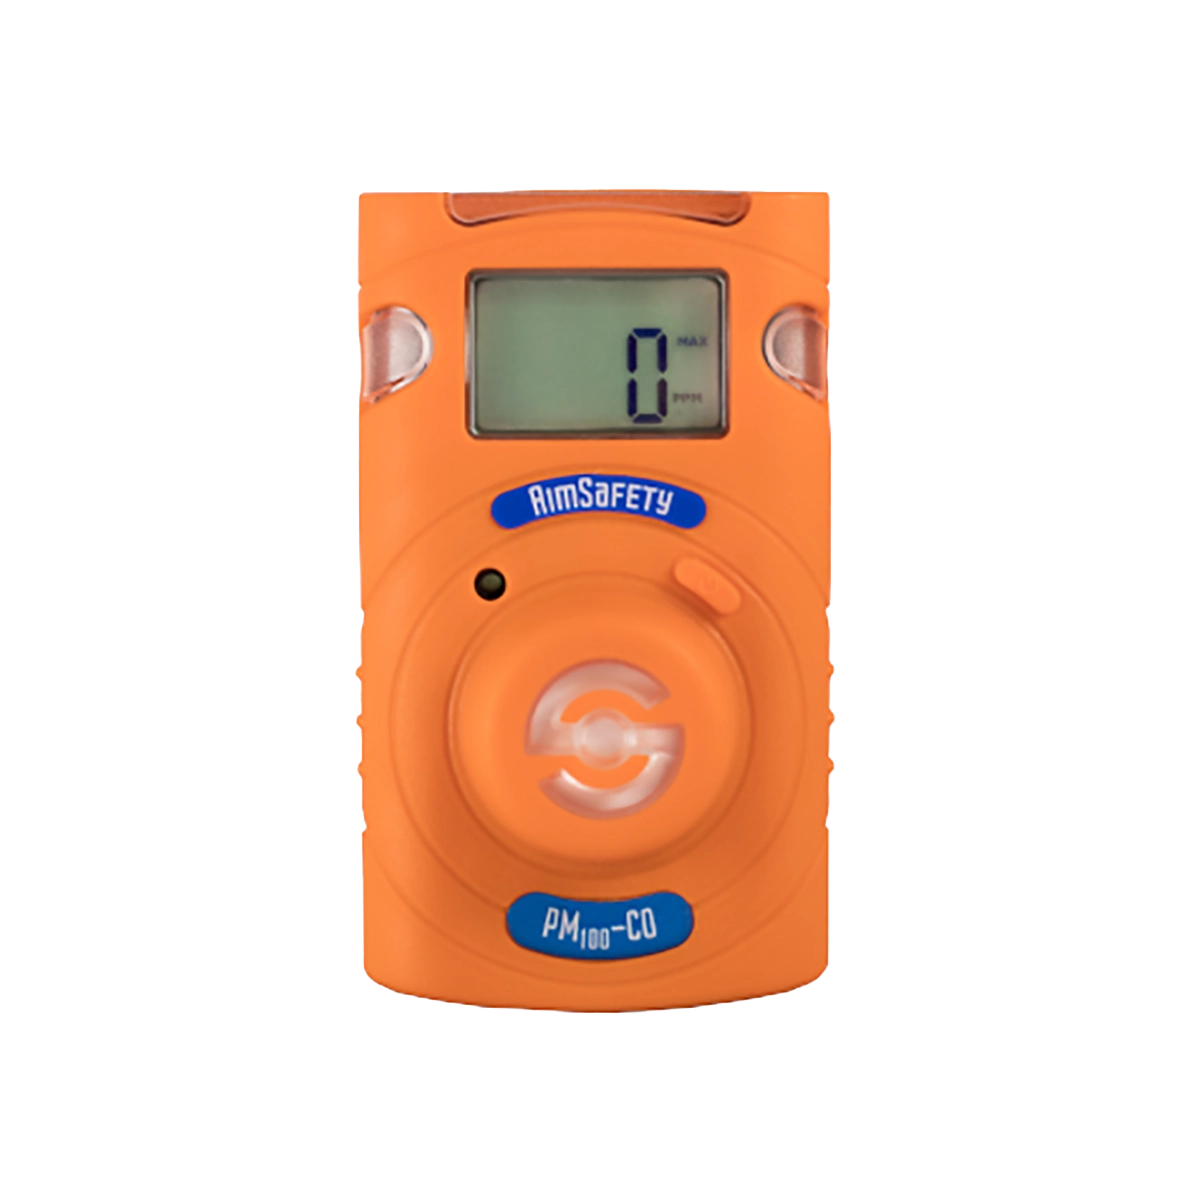 Macurco PM100 CO Single Gas Detector 